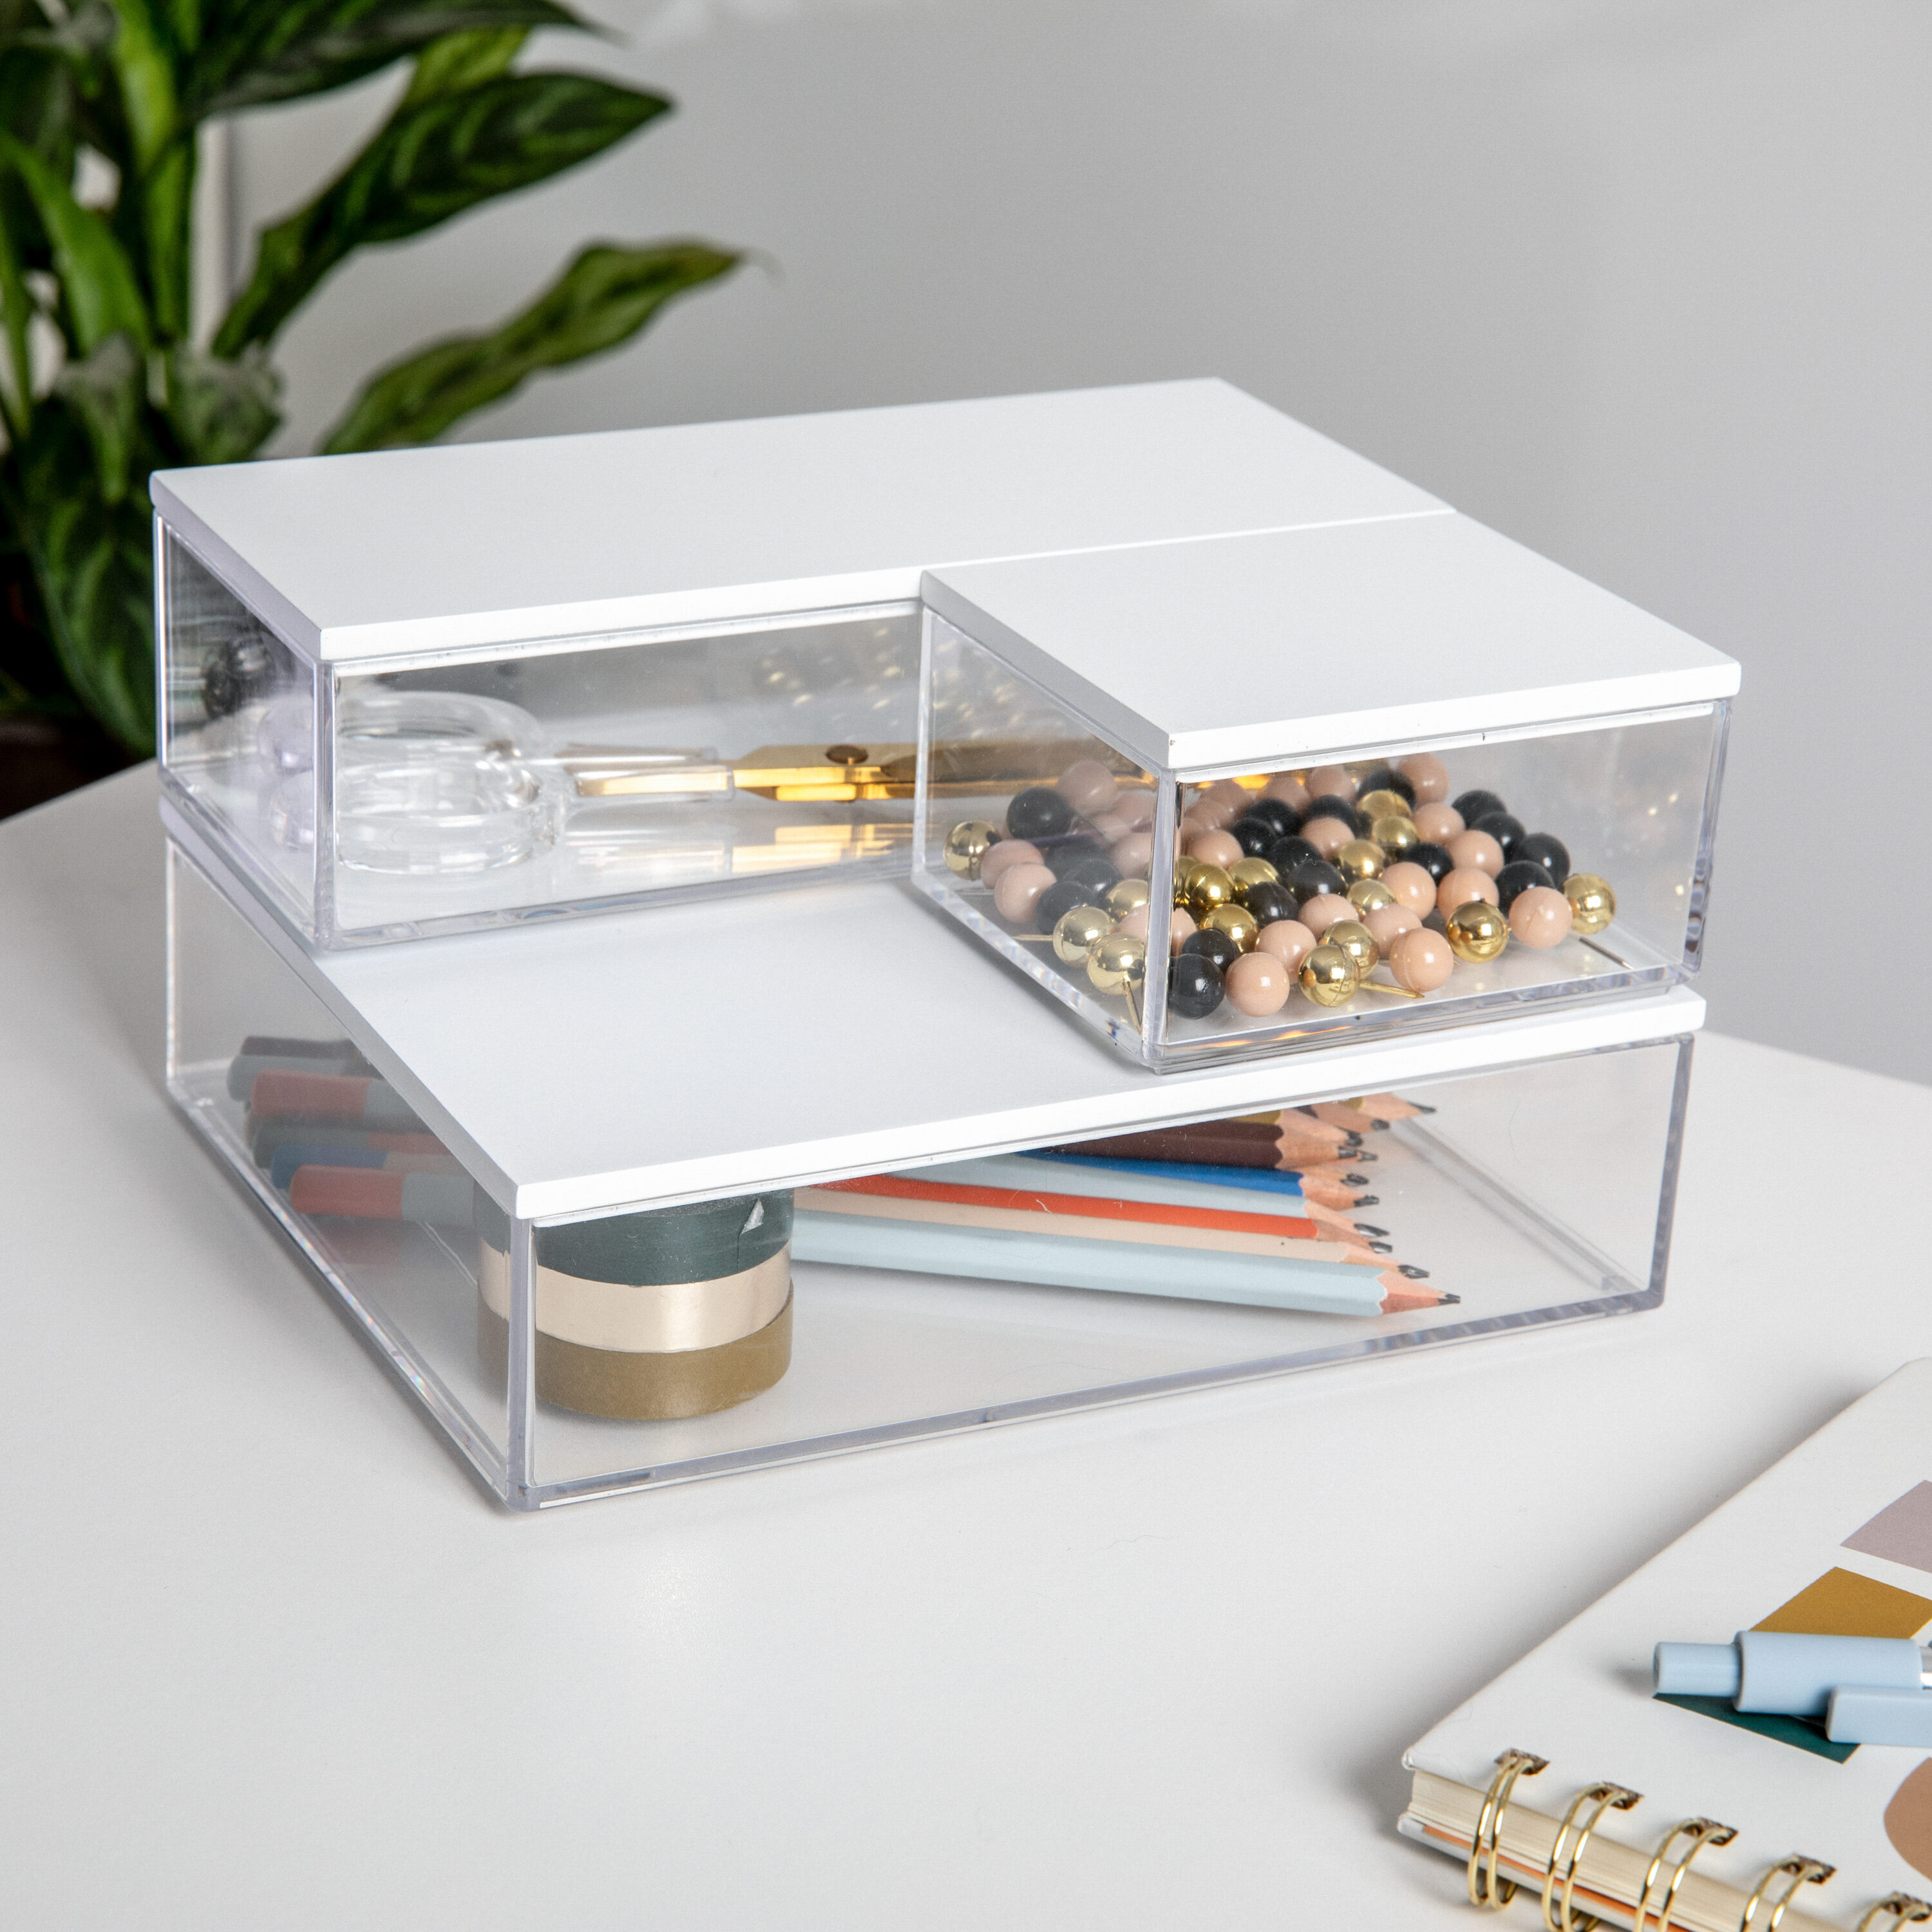 Martha Stewart Brody Clear Plastic Storage Organizer Bins with White  Engineered Wood Lids for Home Office, Kitchen, or Bathroom, 3 Pack  Small/Medium/Large in the Desktop Organizers department at